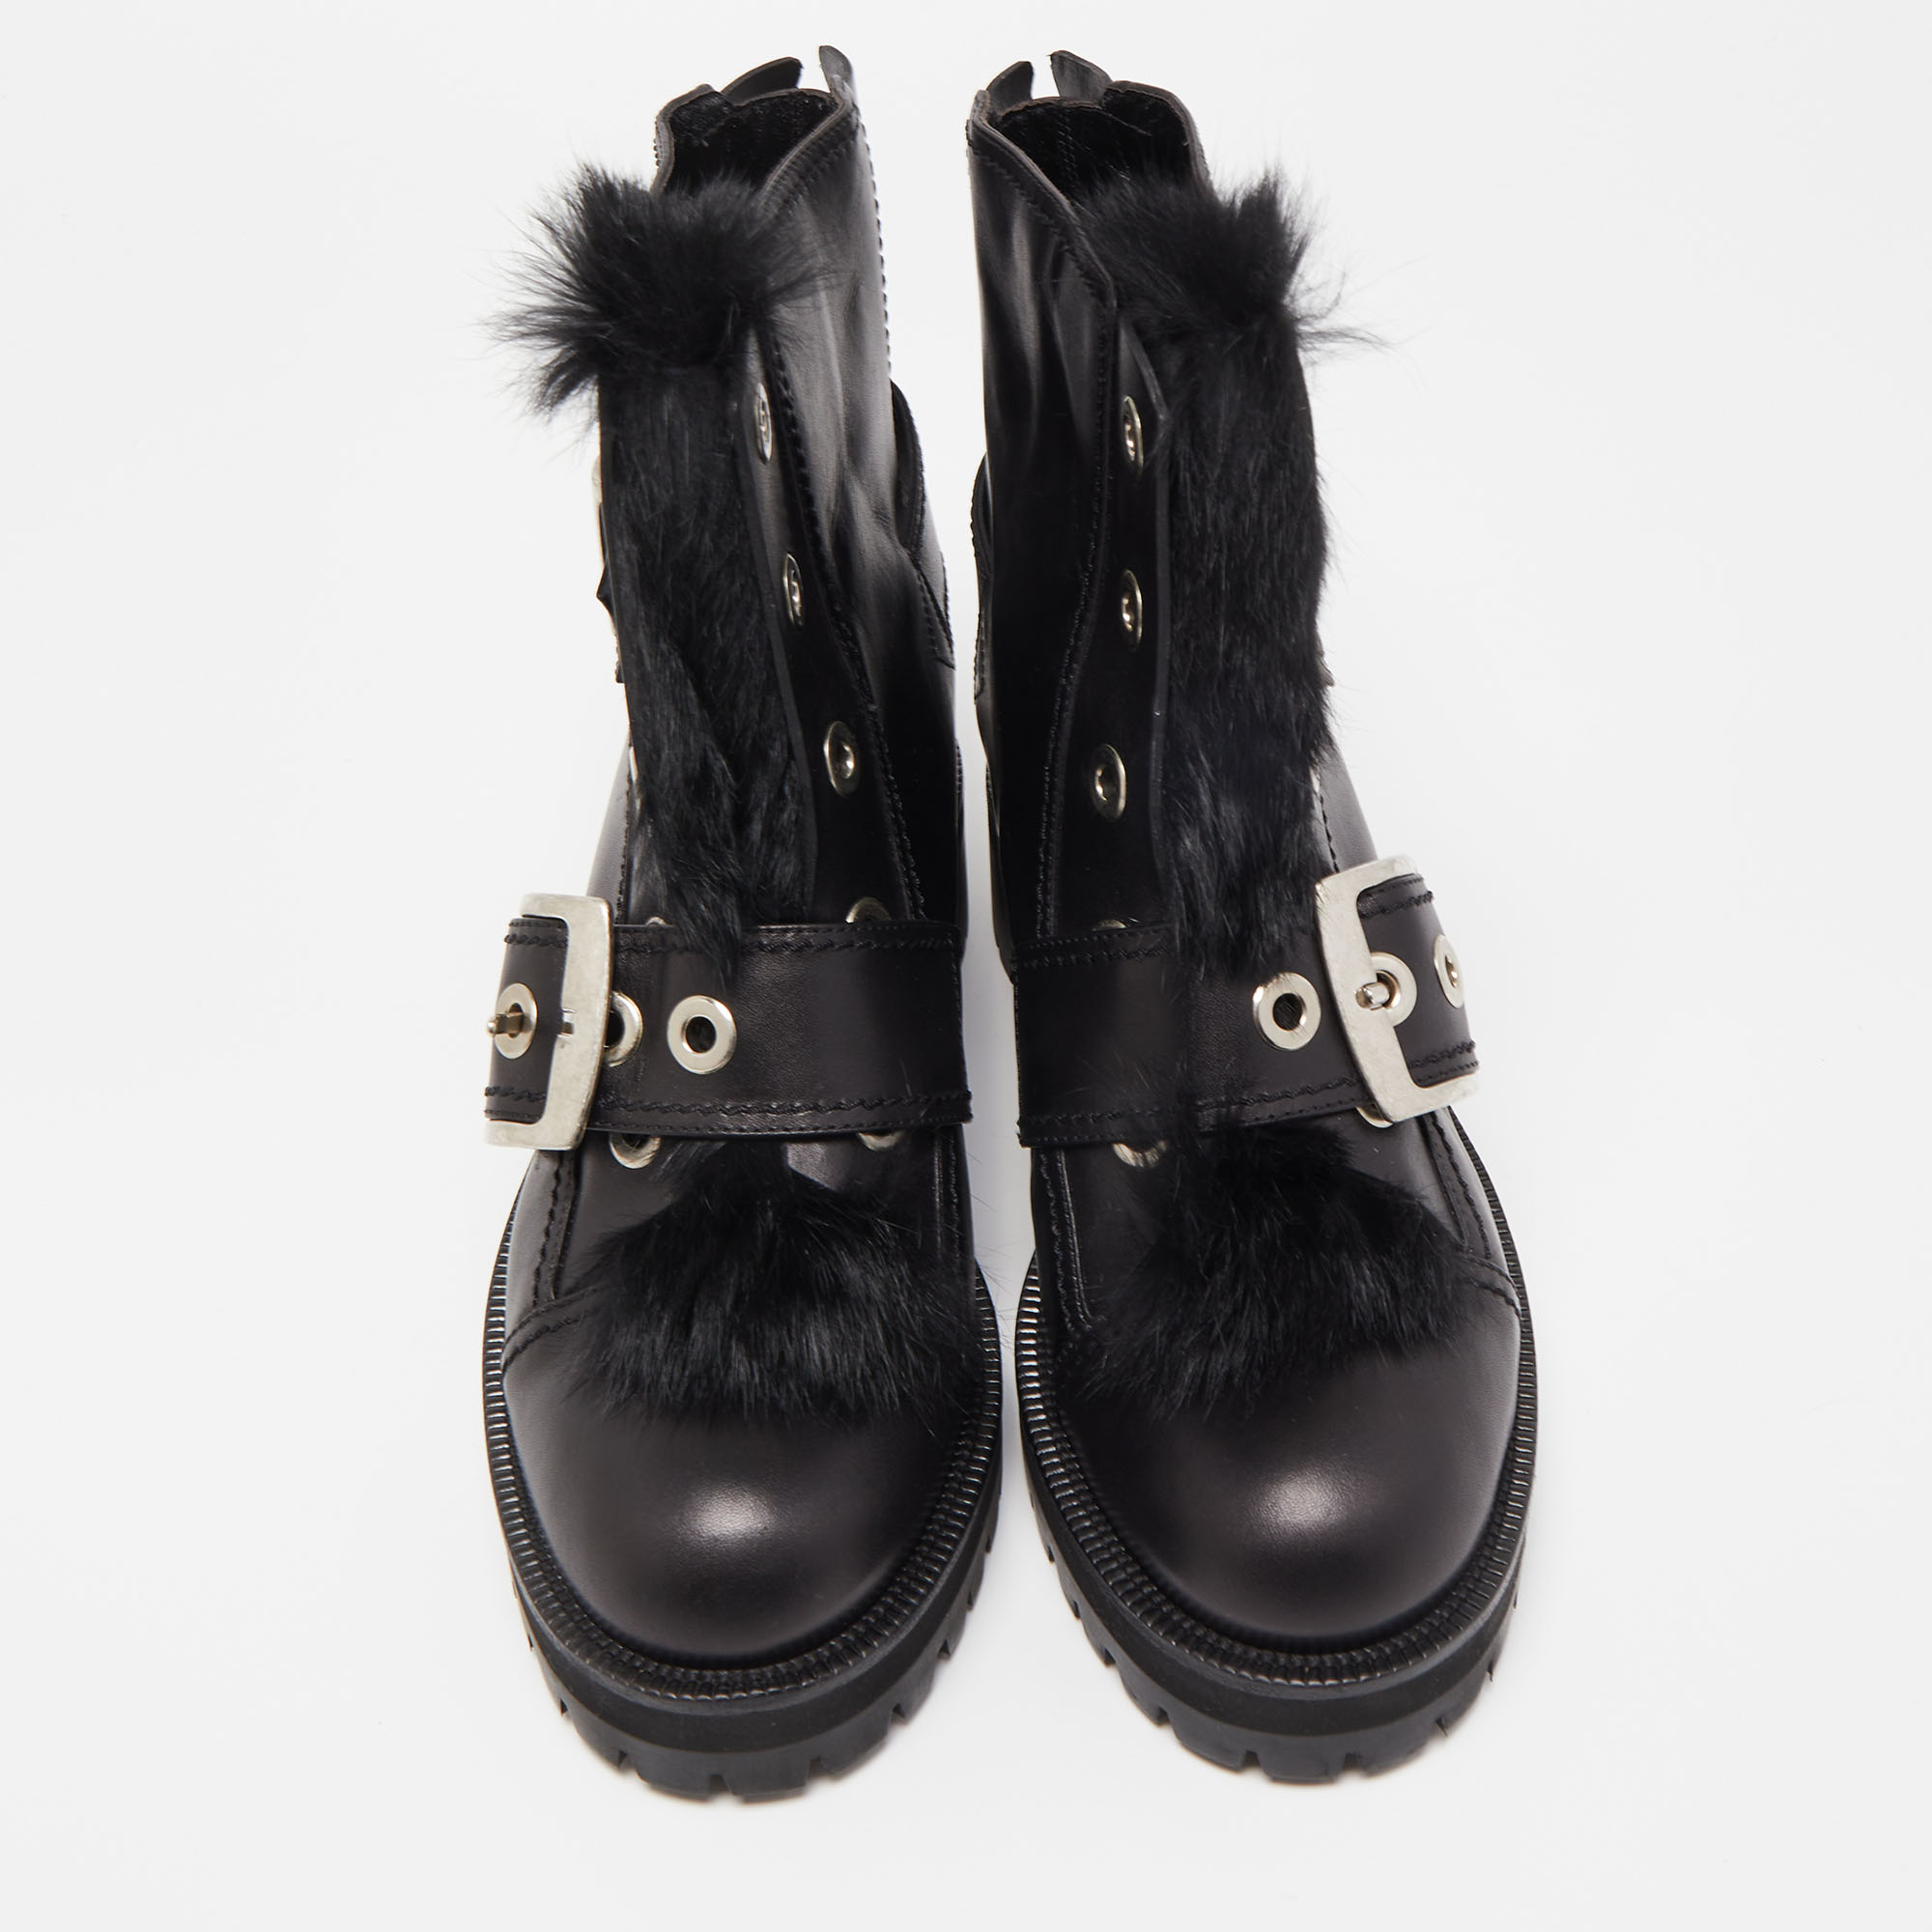 Alexander McQueen Black Leather And Fur Buckle Detail Ankle Boots Size 40